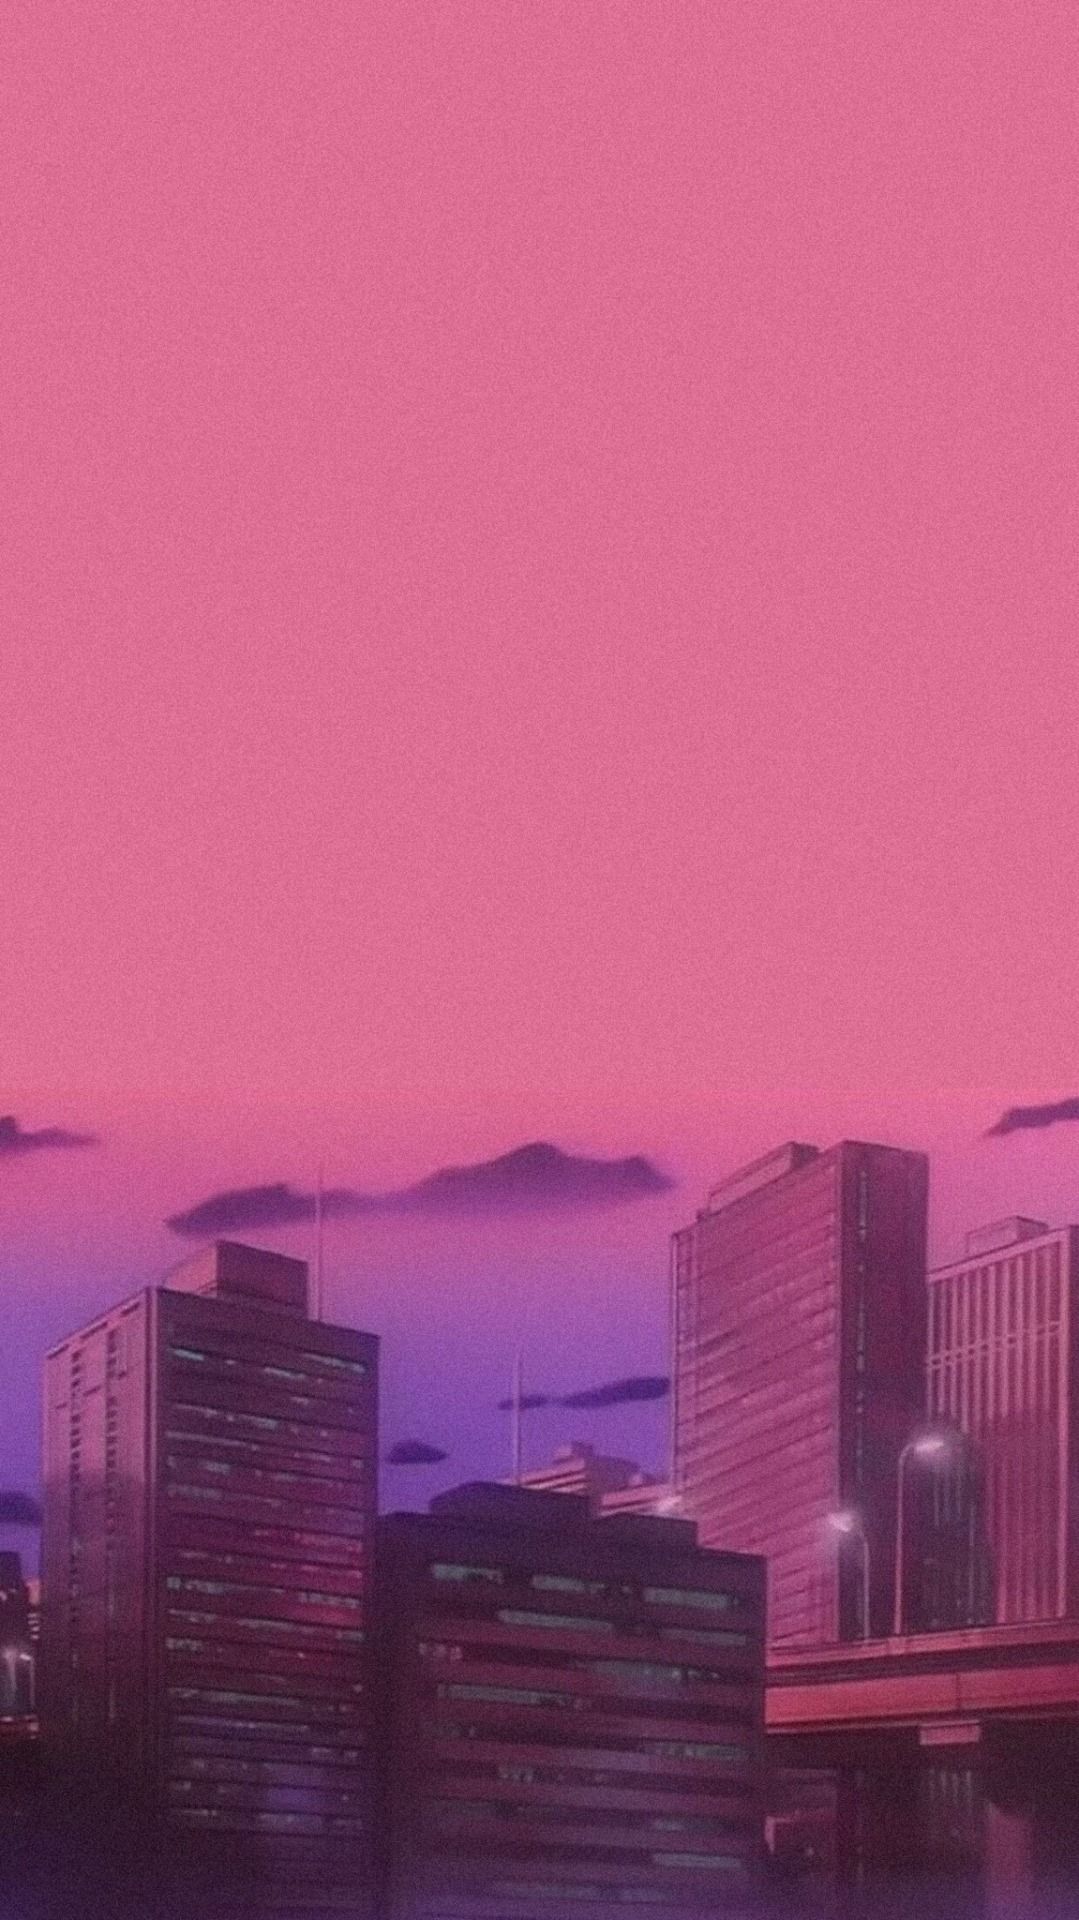 Pink Aesthetic 90s Anime Wallpaper & Background Beautiful Best Available For Download Pink Aesthetic 90s Anime Photo Free On Zicxa.com Image